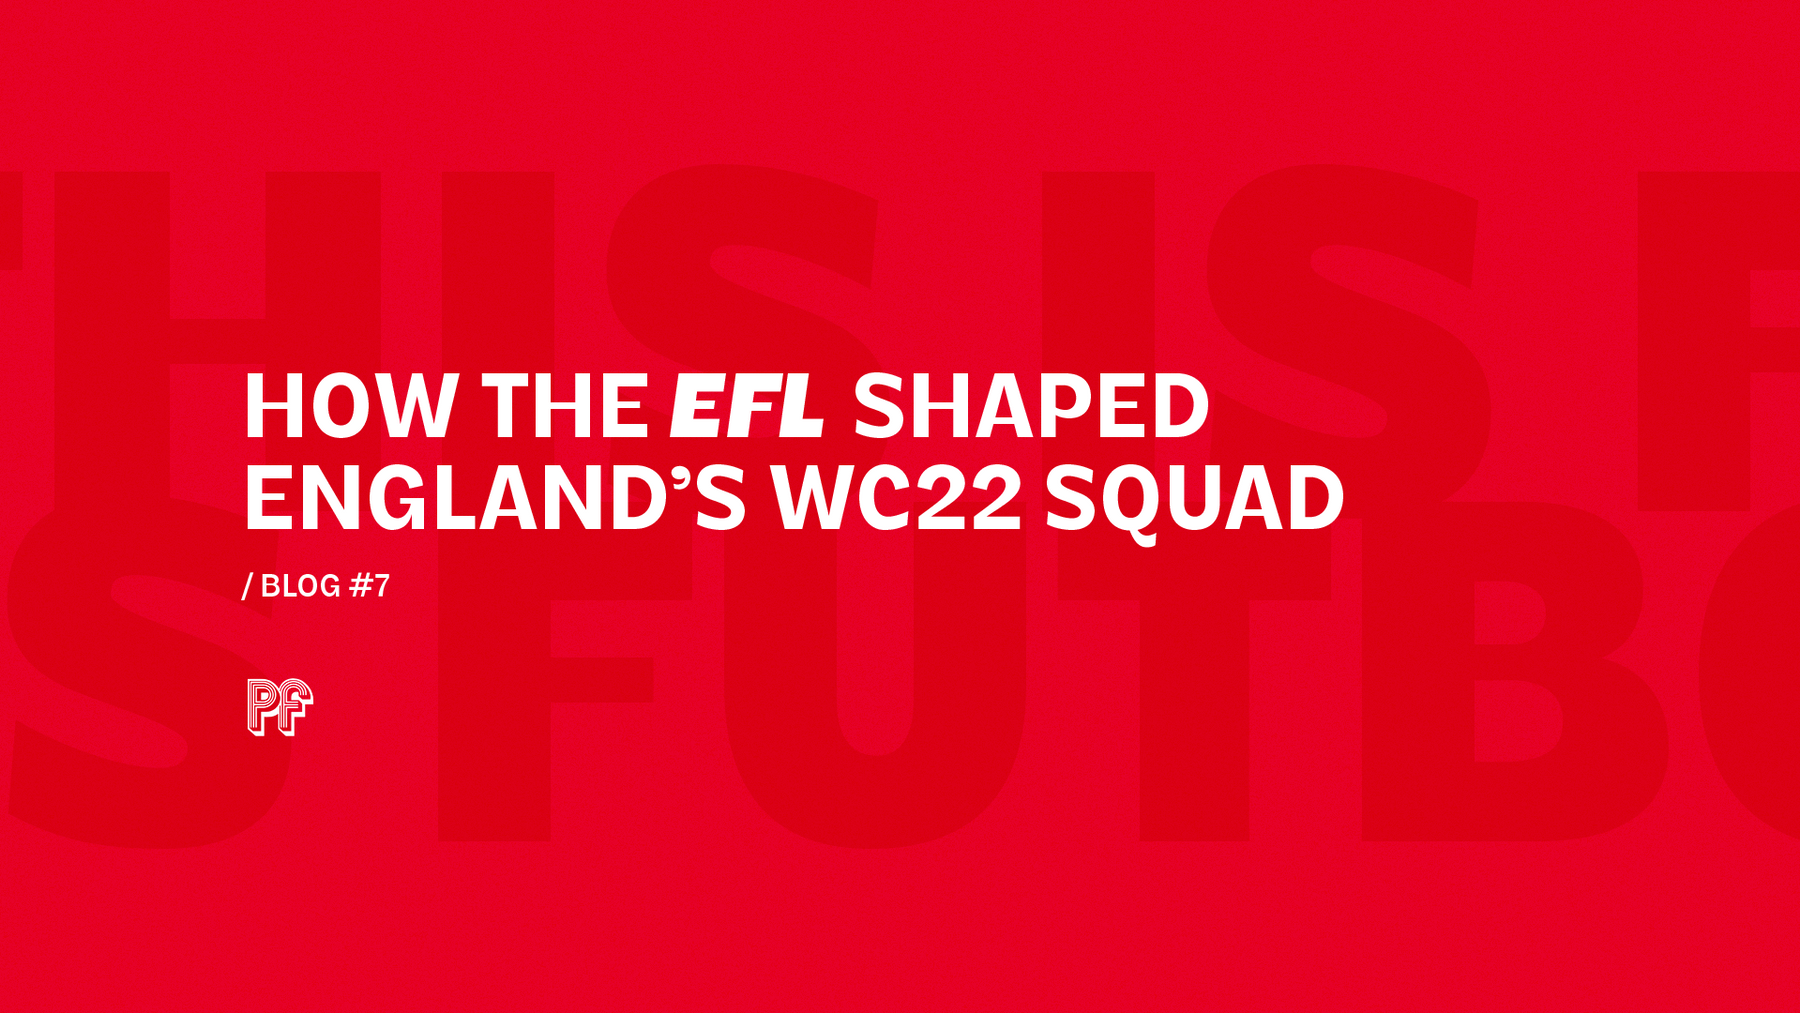 How the EFL shaped England's World Cup Squad